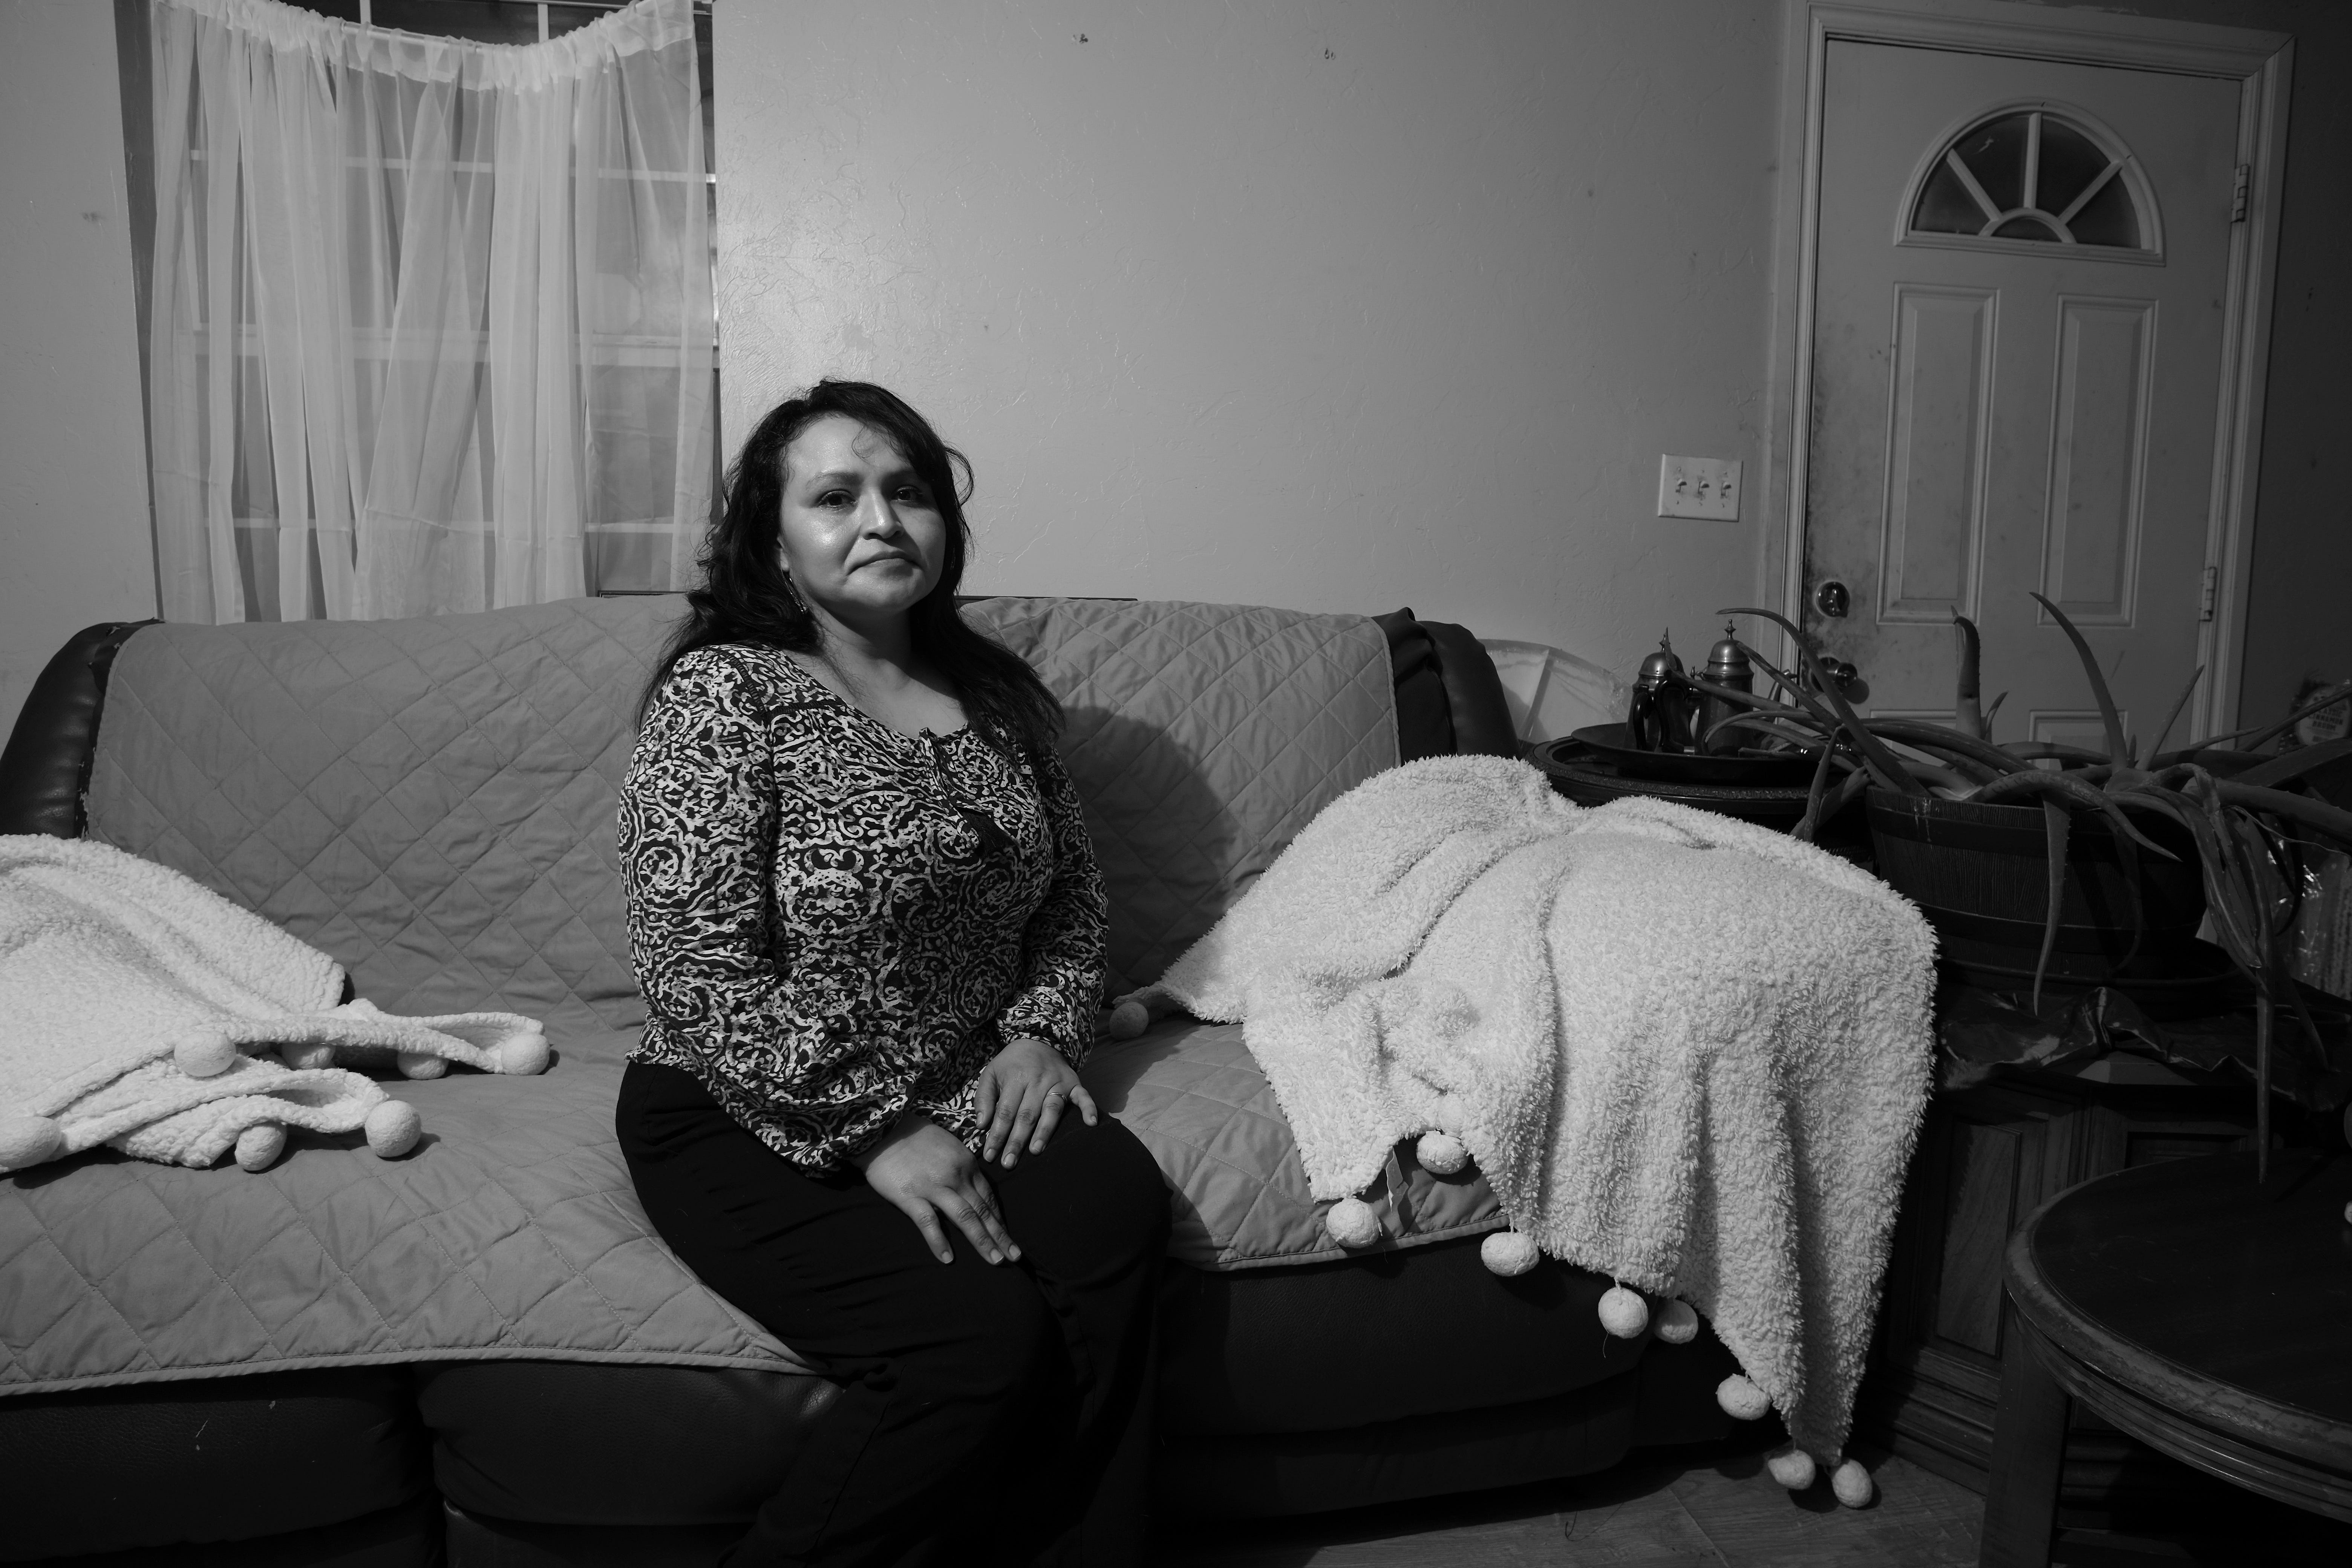 Blanca Keiser, who is a survivor of domestic violence, sits in her home in Oklahoma City on Jan. 29.